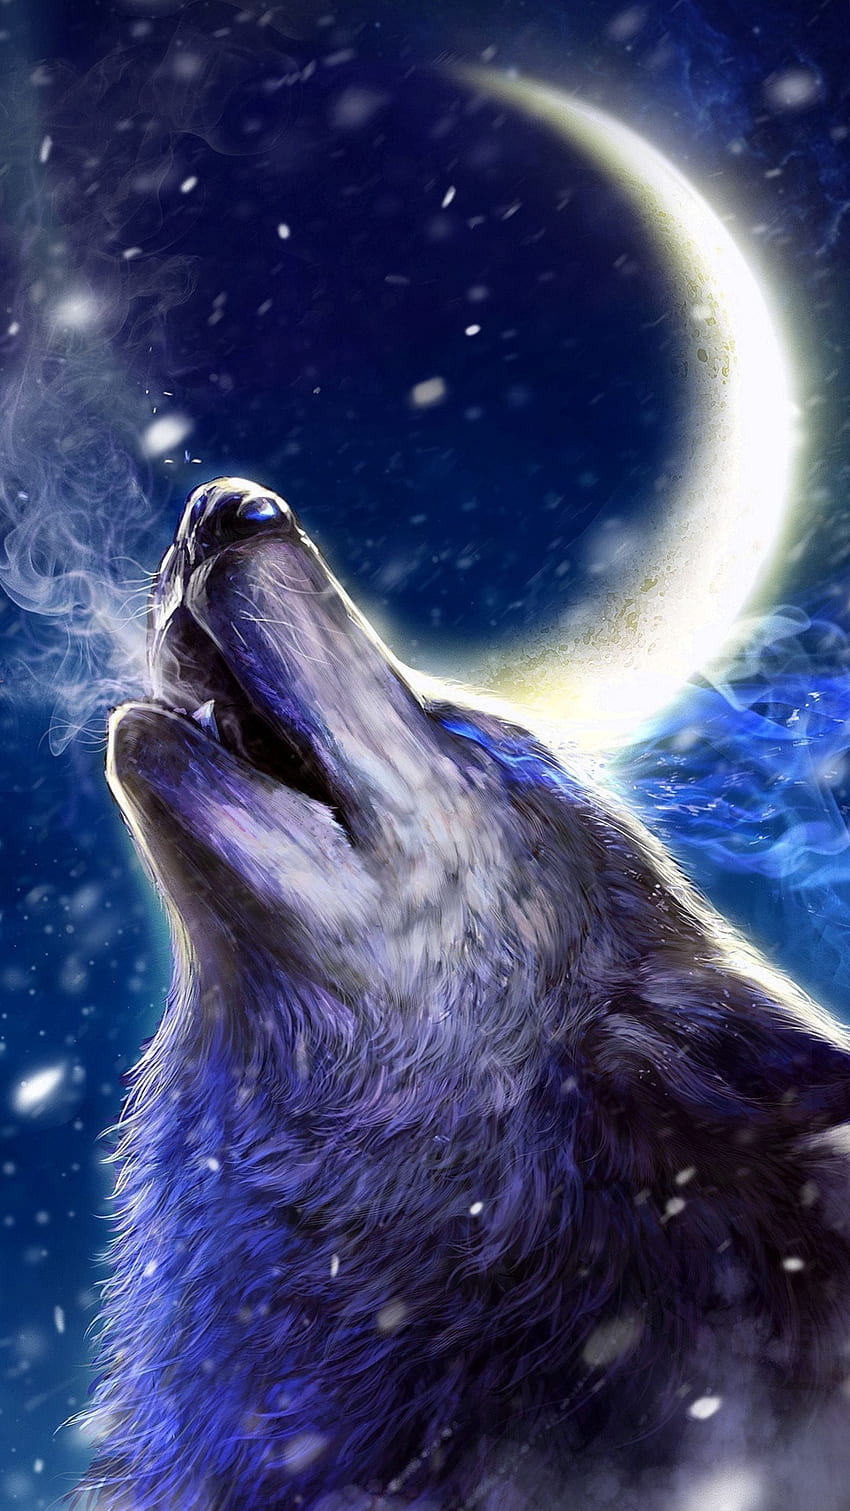 Howling wolf wallpaper by Lugia100  Download on ZEDGE  57f9  Shadow wolf  Wolf images Wolf howling